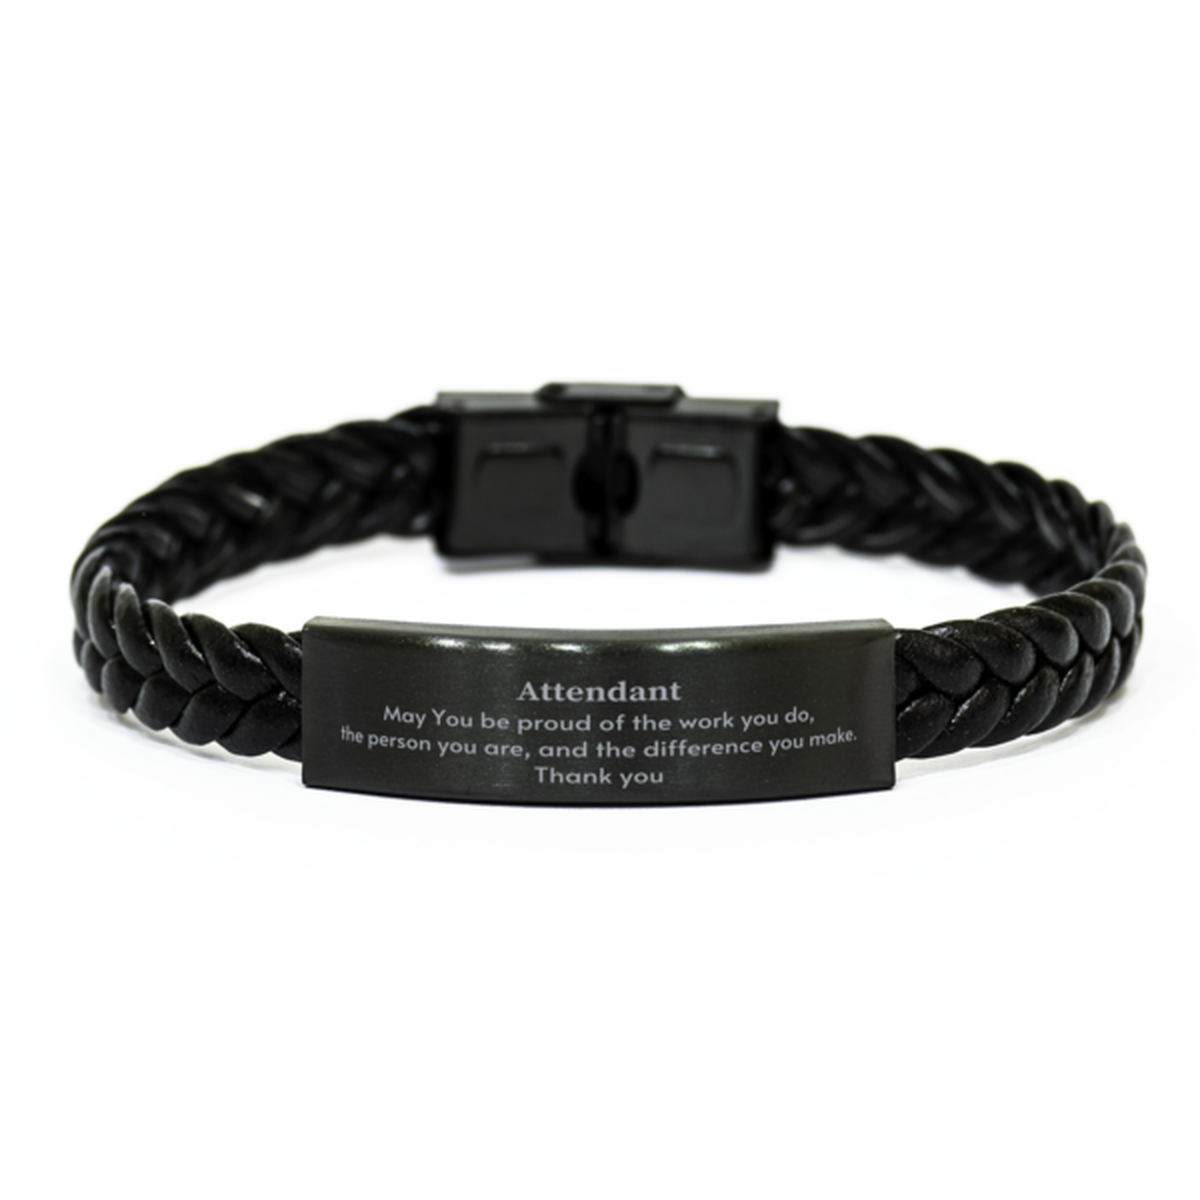 Heartwarming Braided Leather Bracelet Retirement Coworkers Gifts for Attendant, Attendant May You be proud of the work you do, the person you are Gifts for Boss Men Women Friends